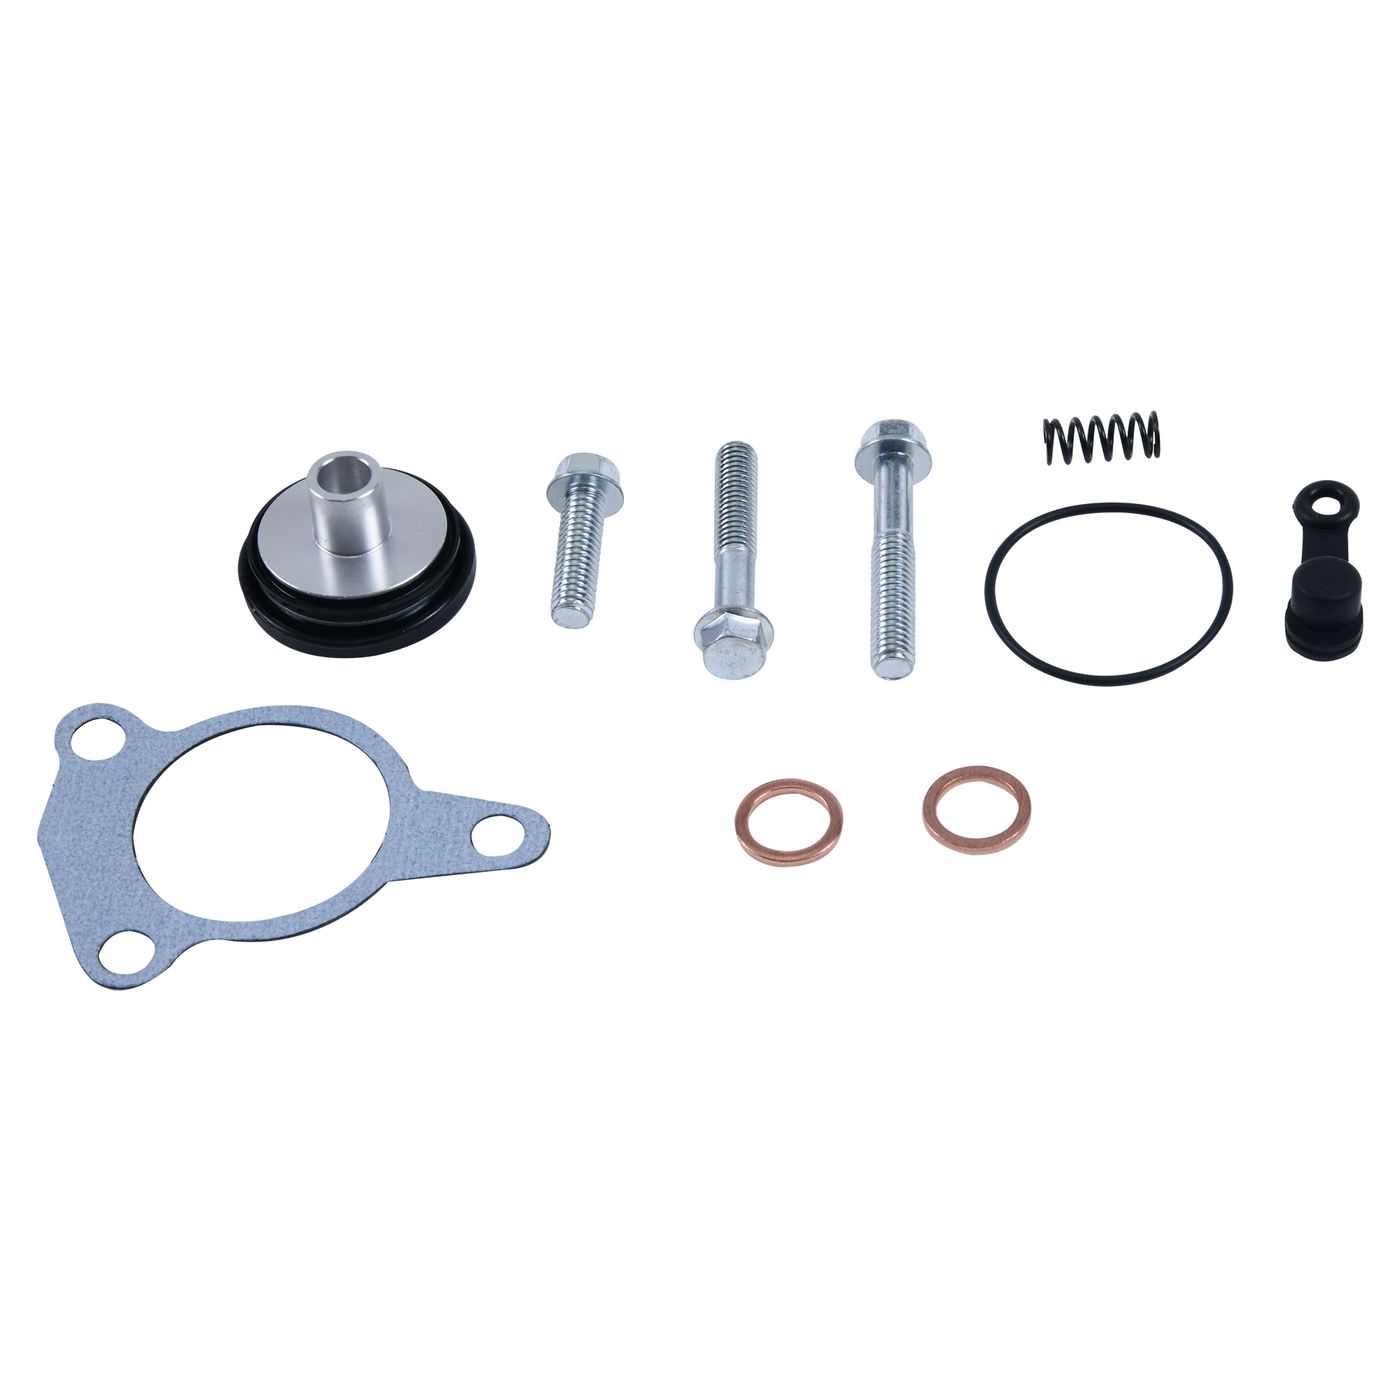 Wrp Clutch Slave Cylinder Kits - WRP186038 image